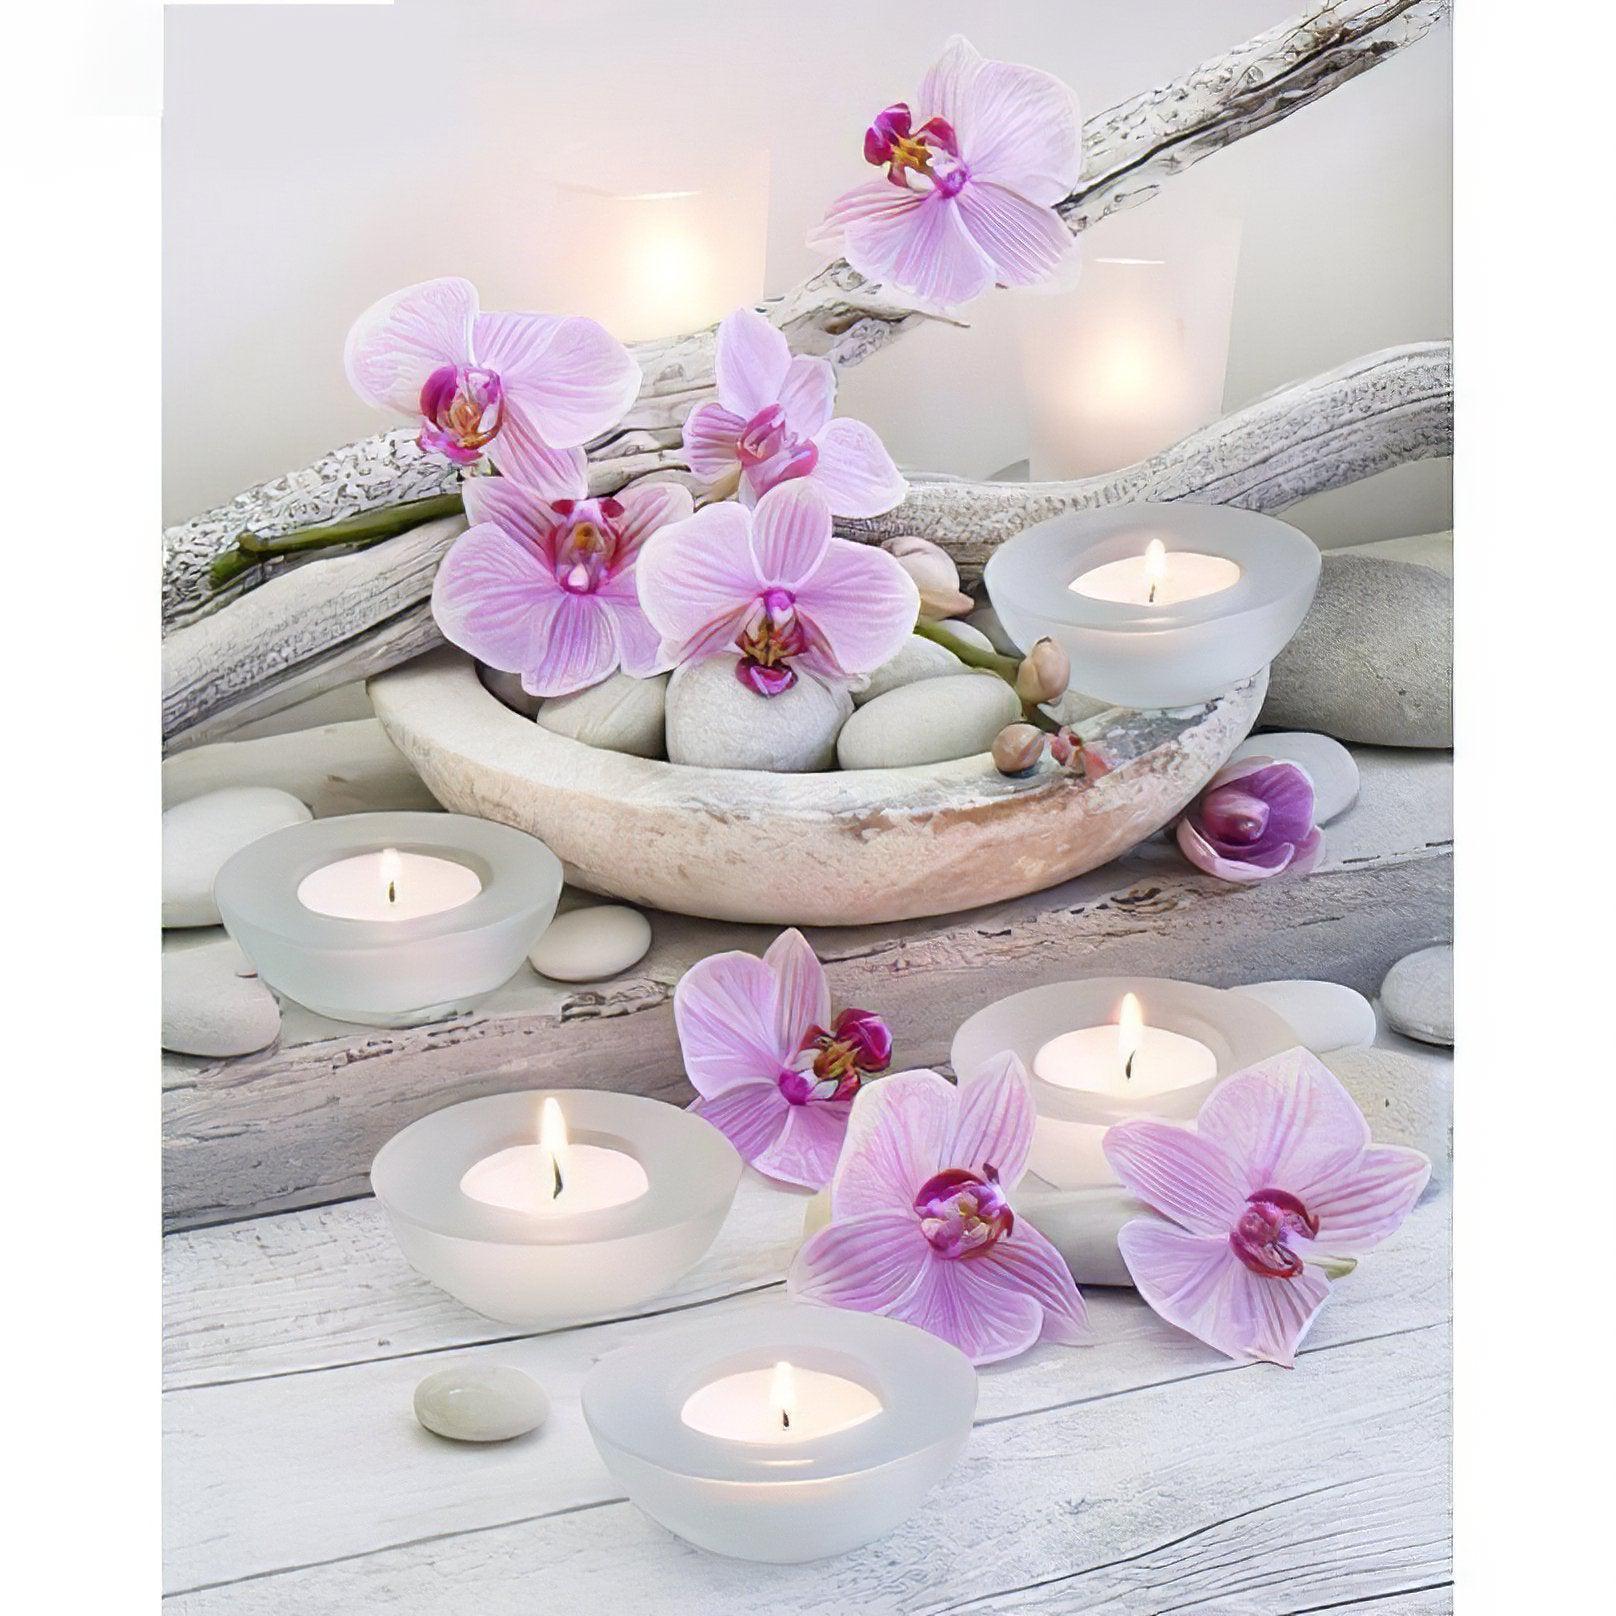 Ambiance Zen and Candle: Serenity and peace in every piece Ambiance Zen And Candle - Diamondartlove